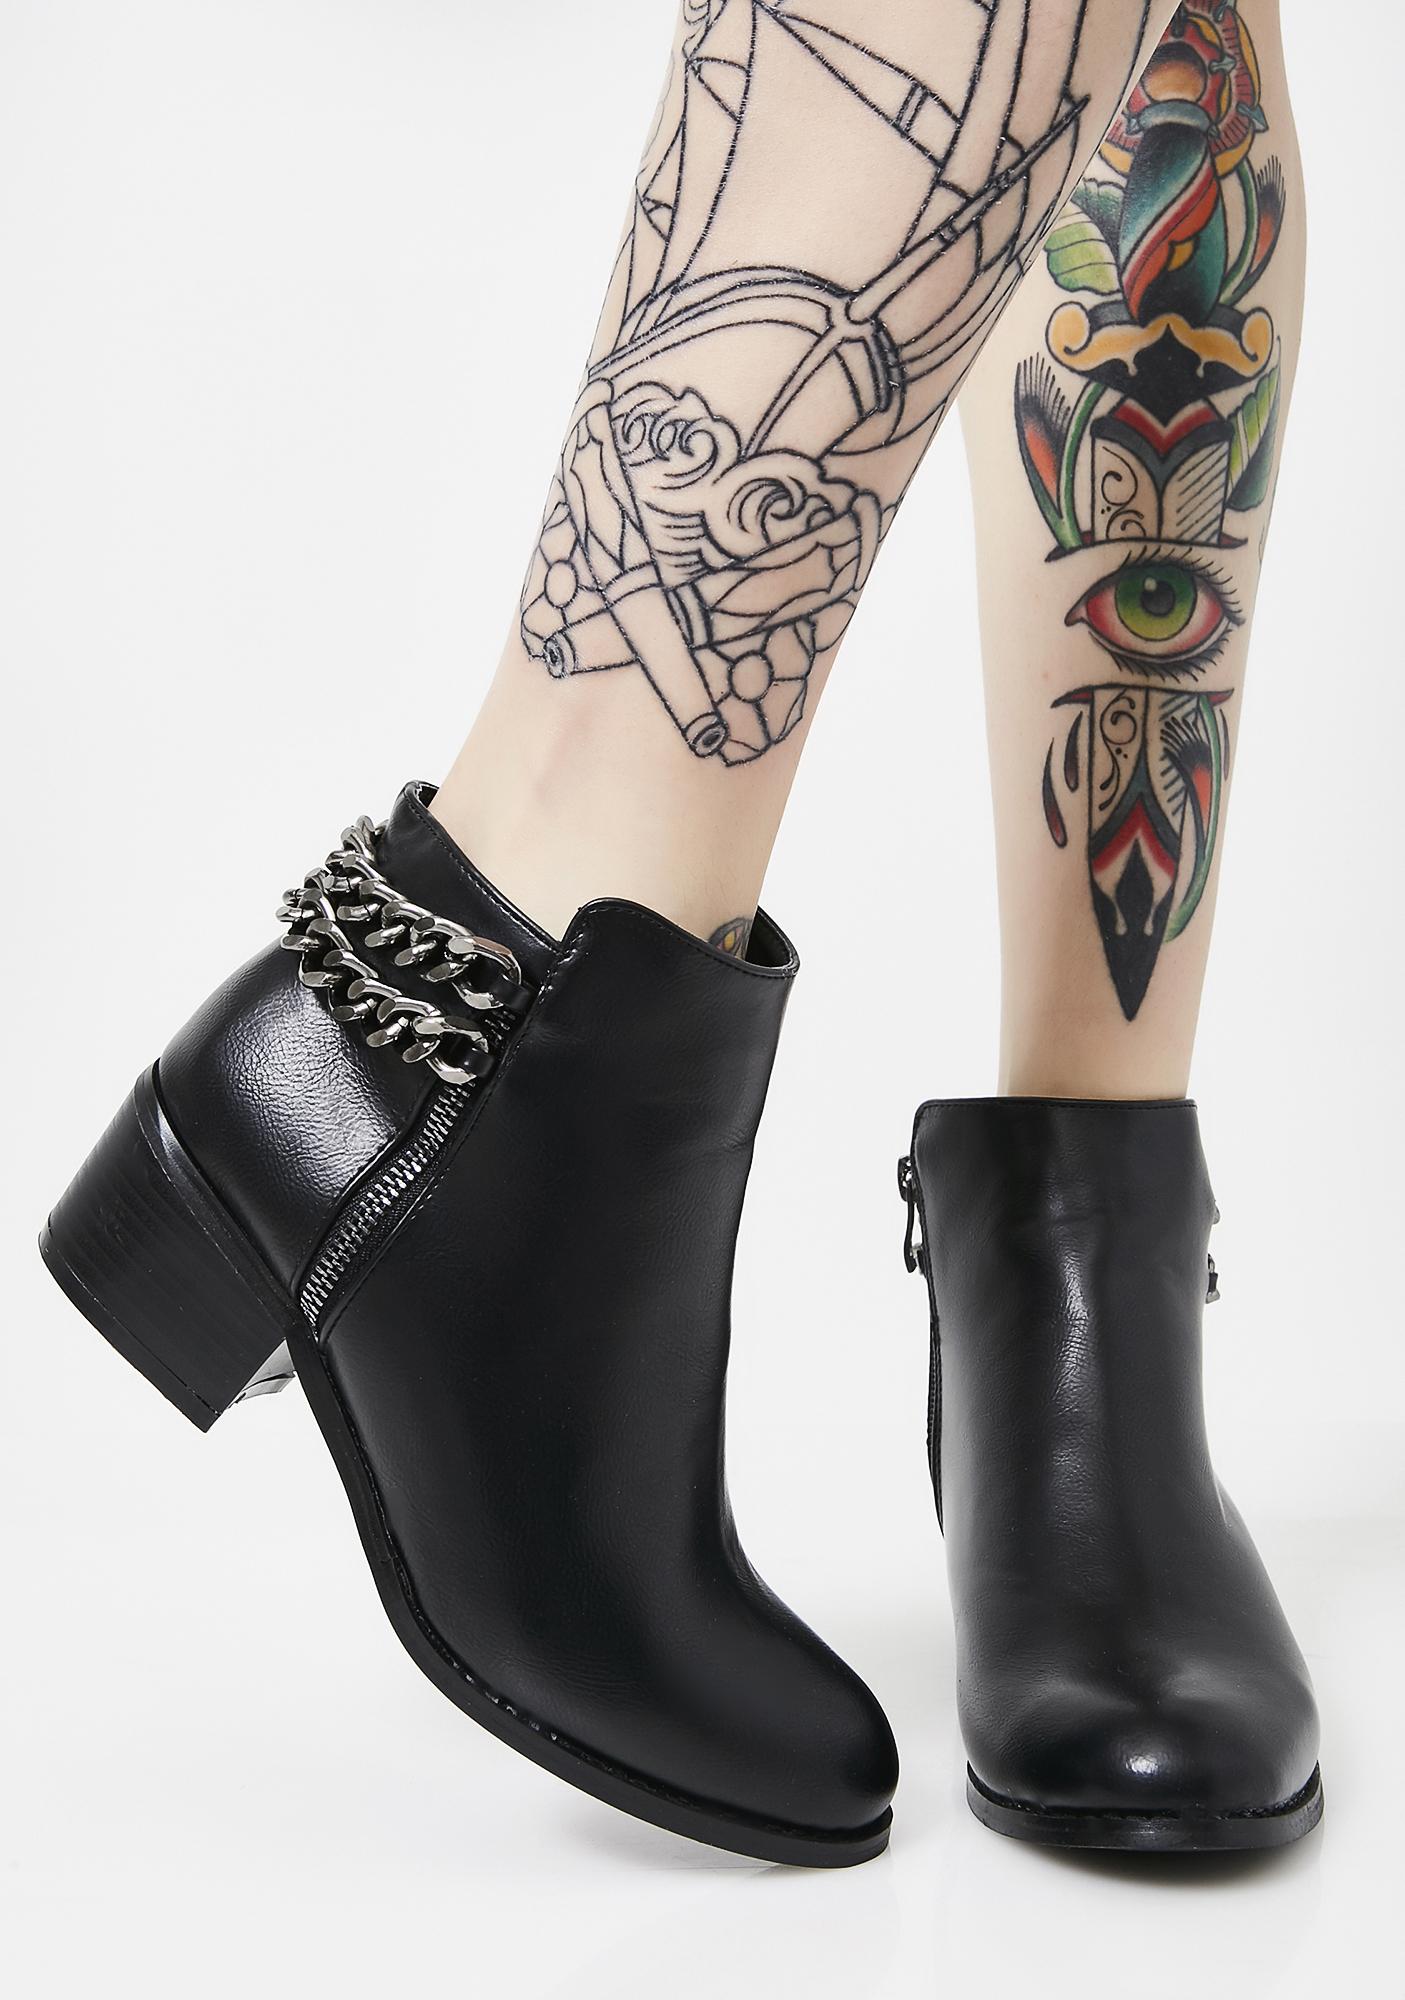 black chain ankle boots